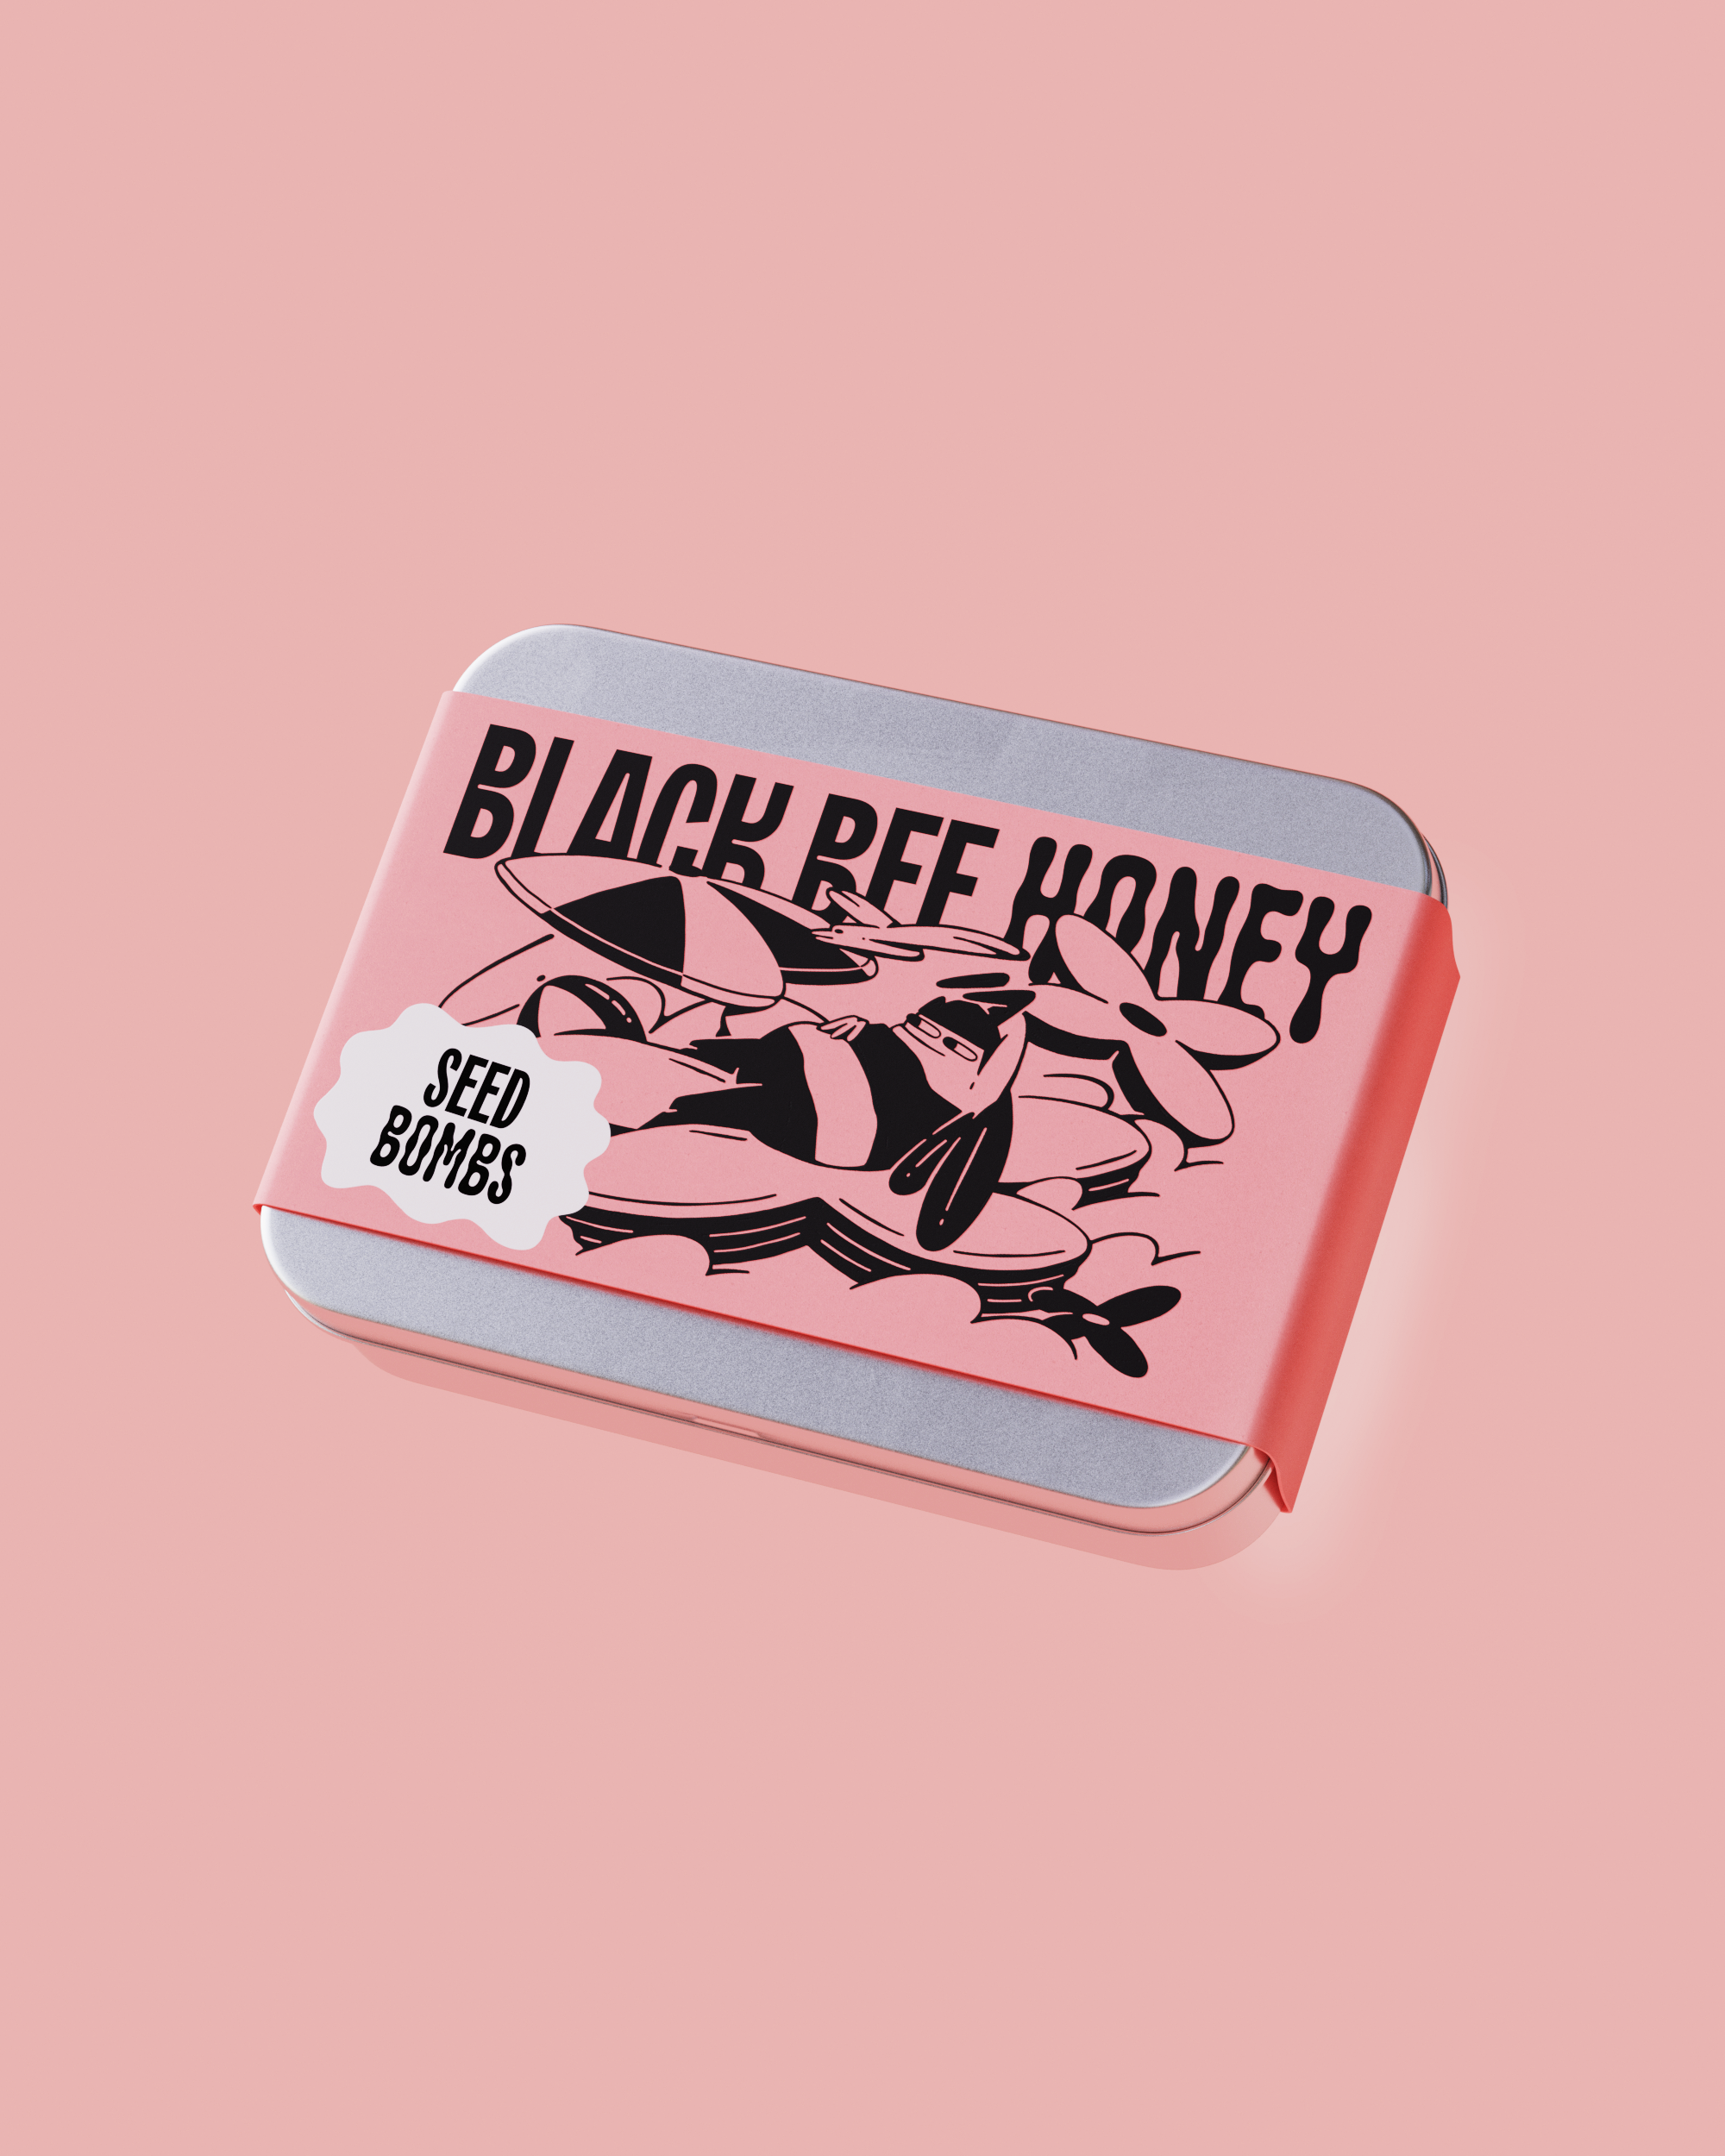 OMSE’s Captivating Packaging for Black Bee Honey’s Pure British Delight